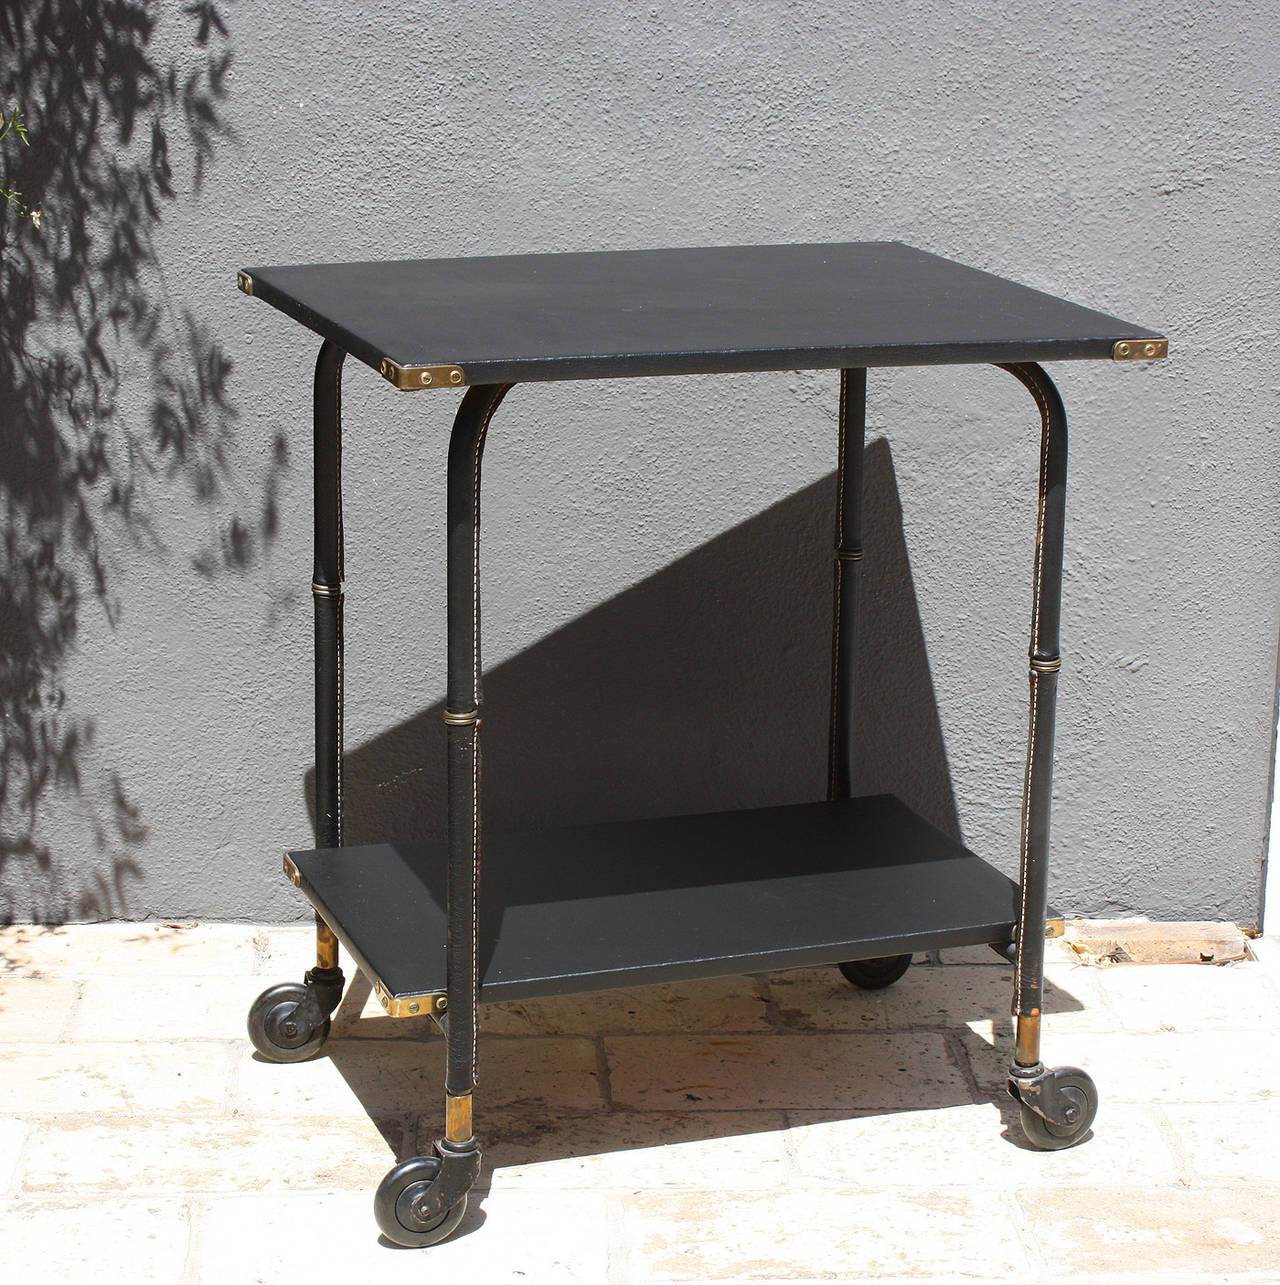 Jacques Adnet, rolling cart or trolley adjustable table with black lacquered metal covered with black (Piqué sellier), saddle stitch leather.
Top and shelf covered in black vinyl, typical of Adnet work.
Corner hardware and legs parts in